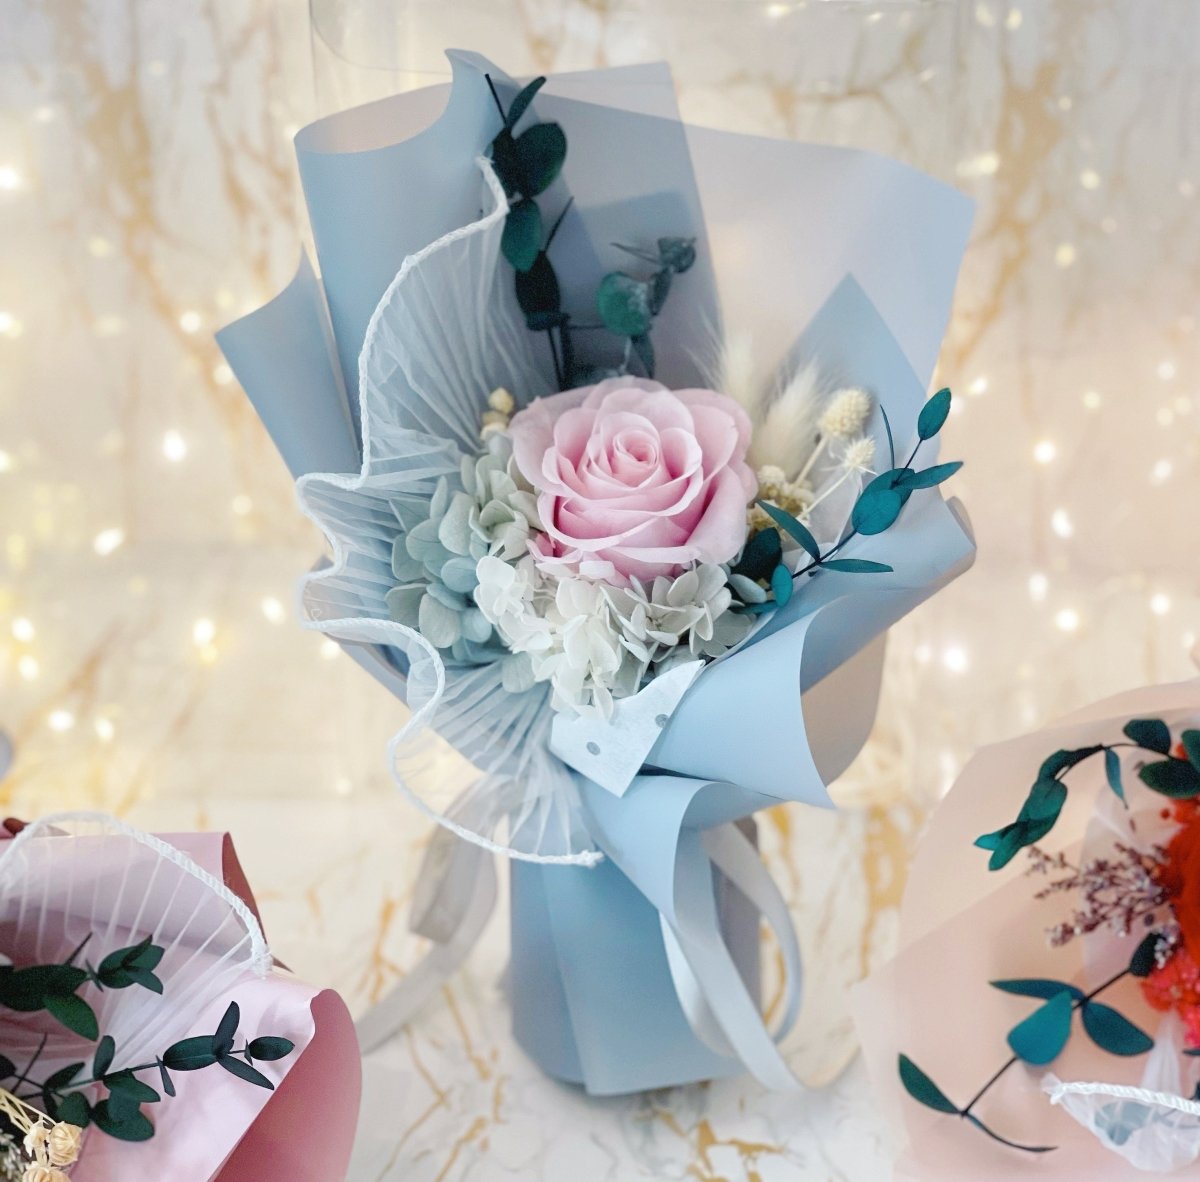 Darling Pink - Everlasting Flower Bouquet (Real Preserved Roses and Dried Flowers) - Rainbowly Fresh Fruit Gift and Flower Arrangments